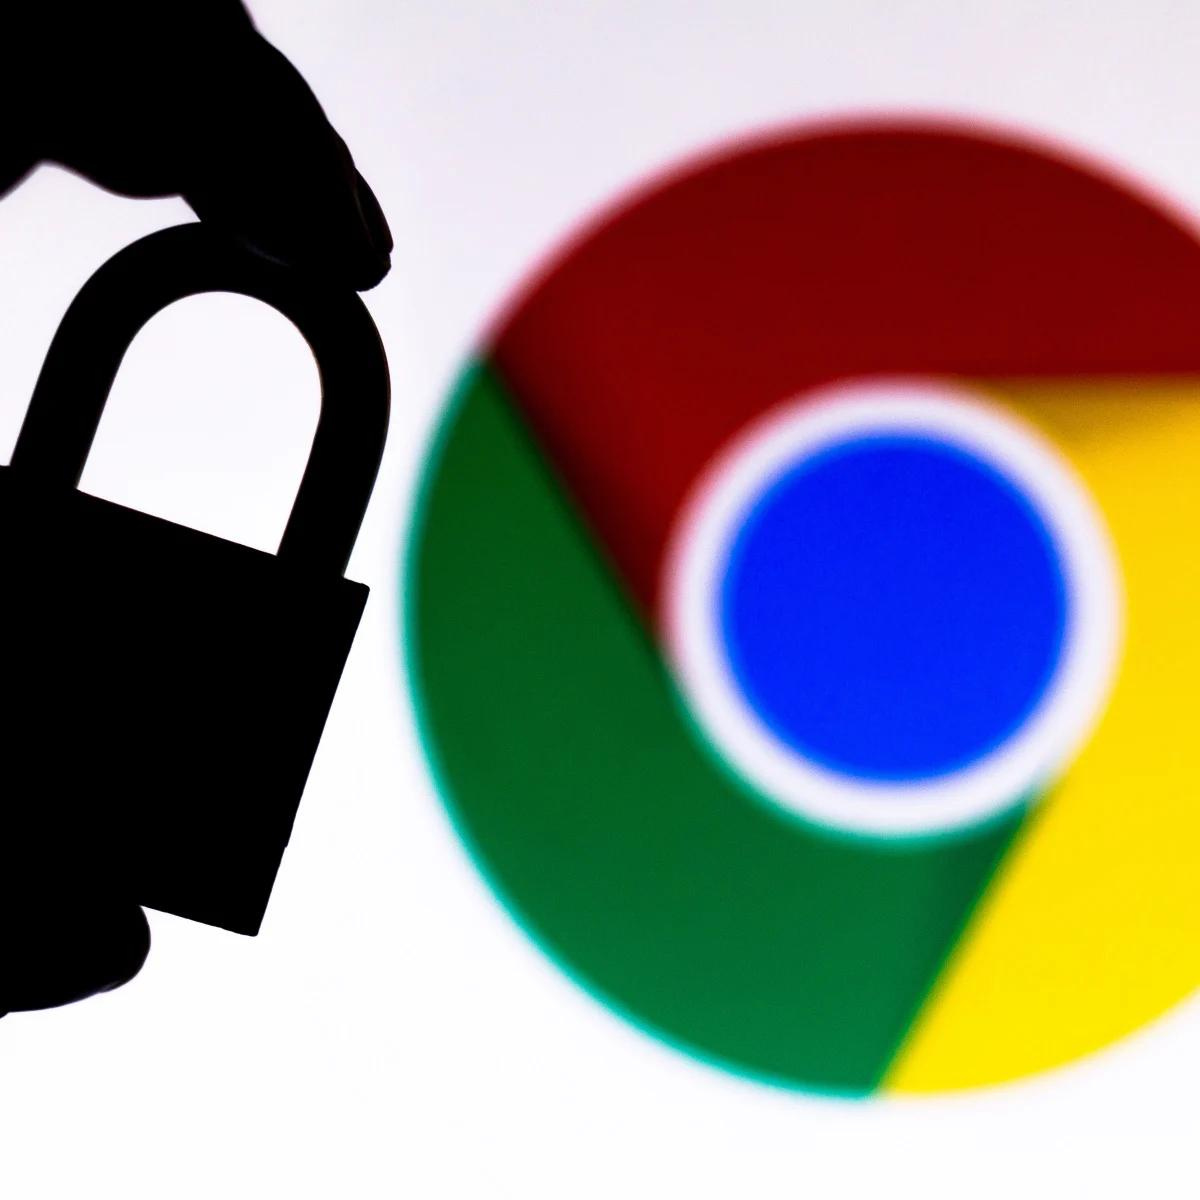 Google Chrome may be getting a new privacy feature